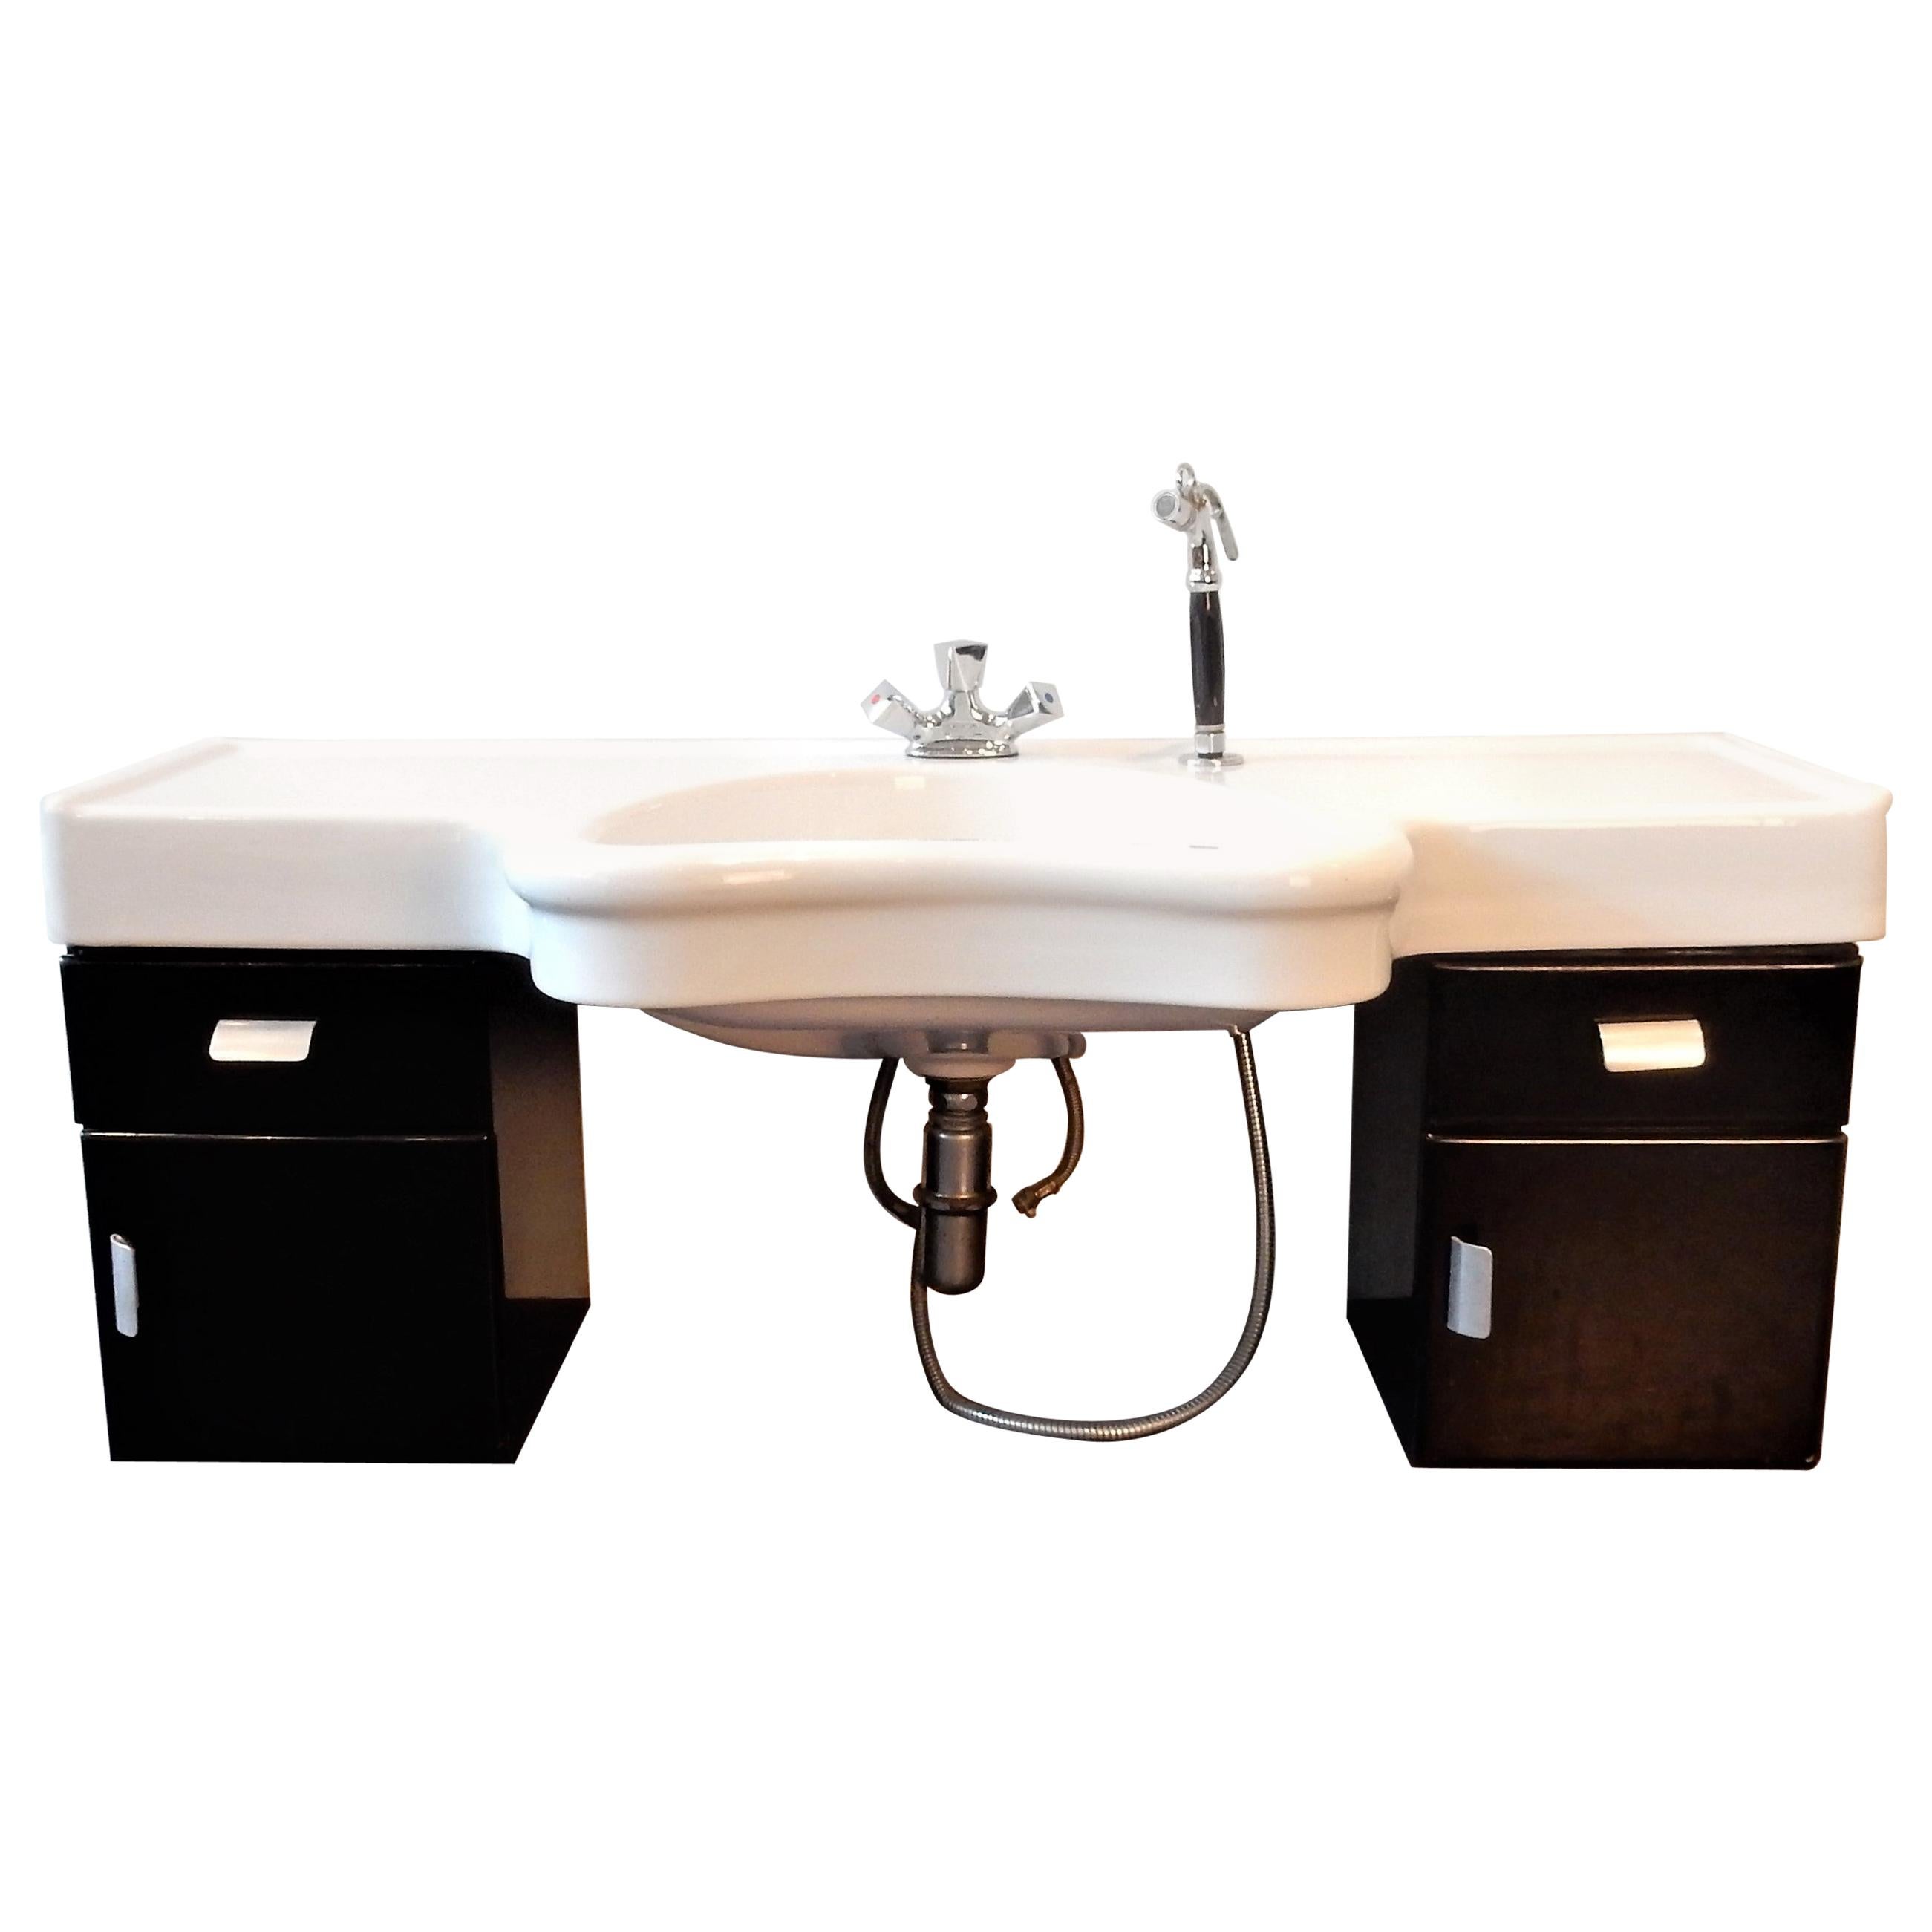 Vintage Wall-Mounted Hairdressers Wash Basin with Cabinet by Olymp, Germany 1950